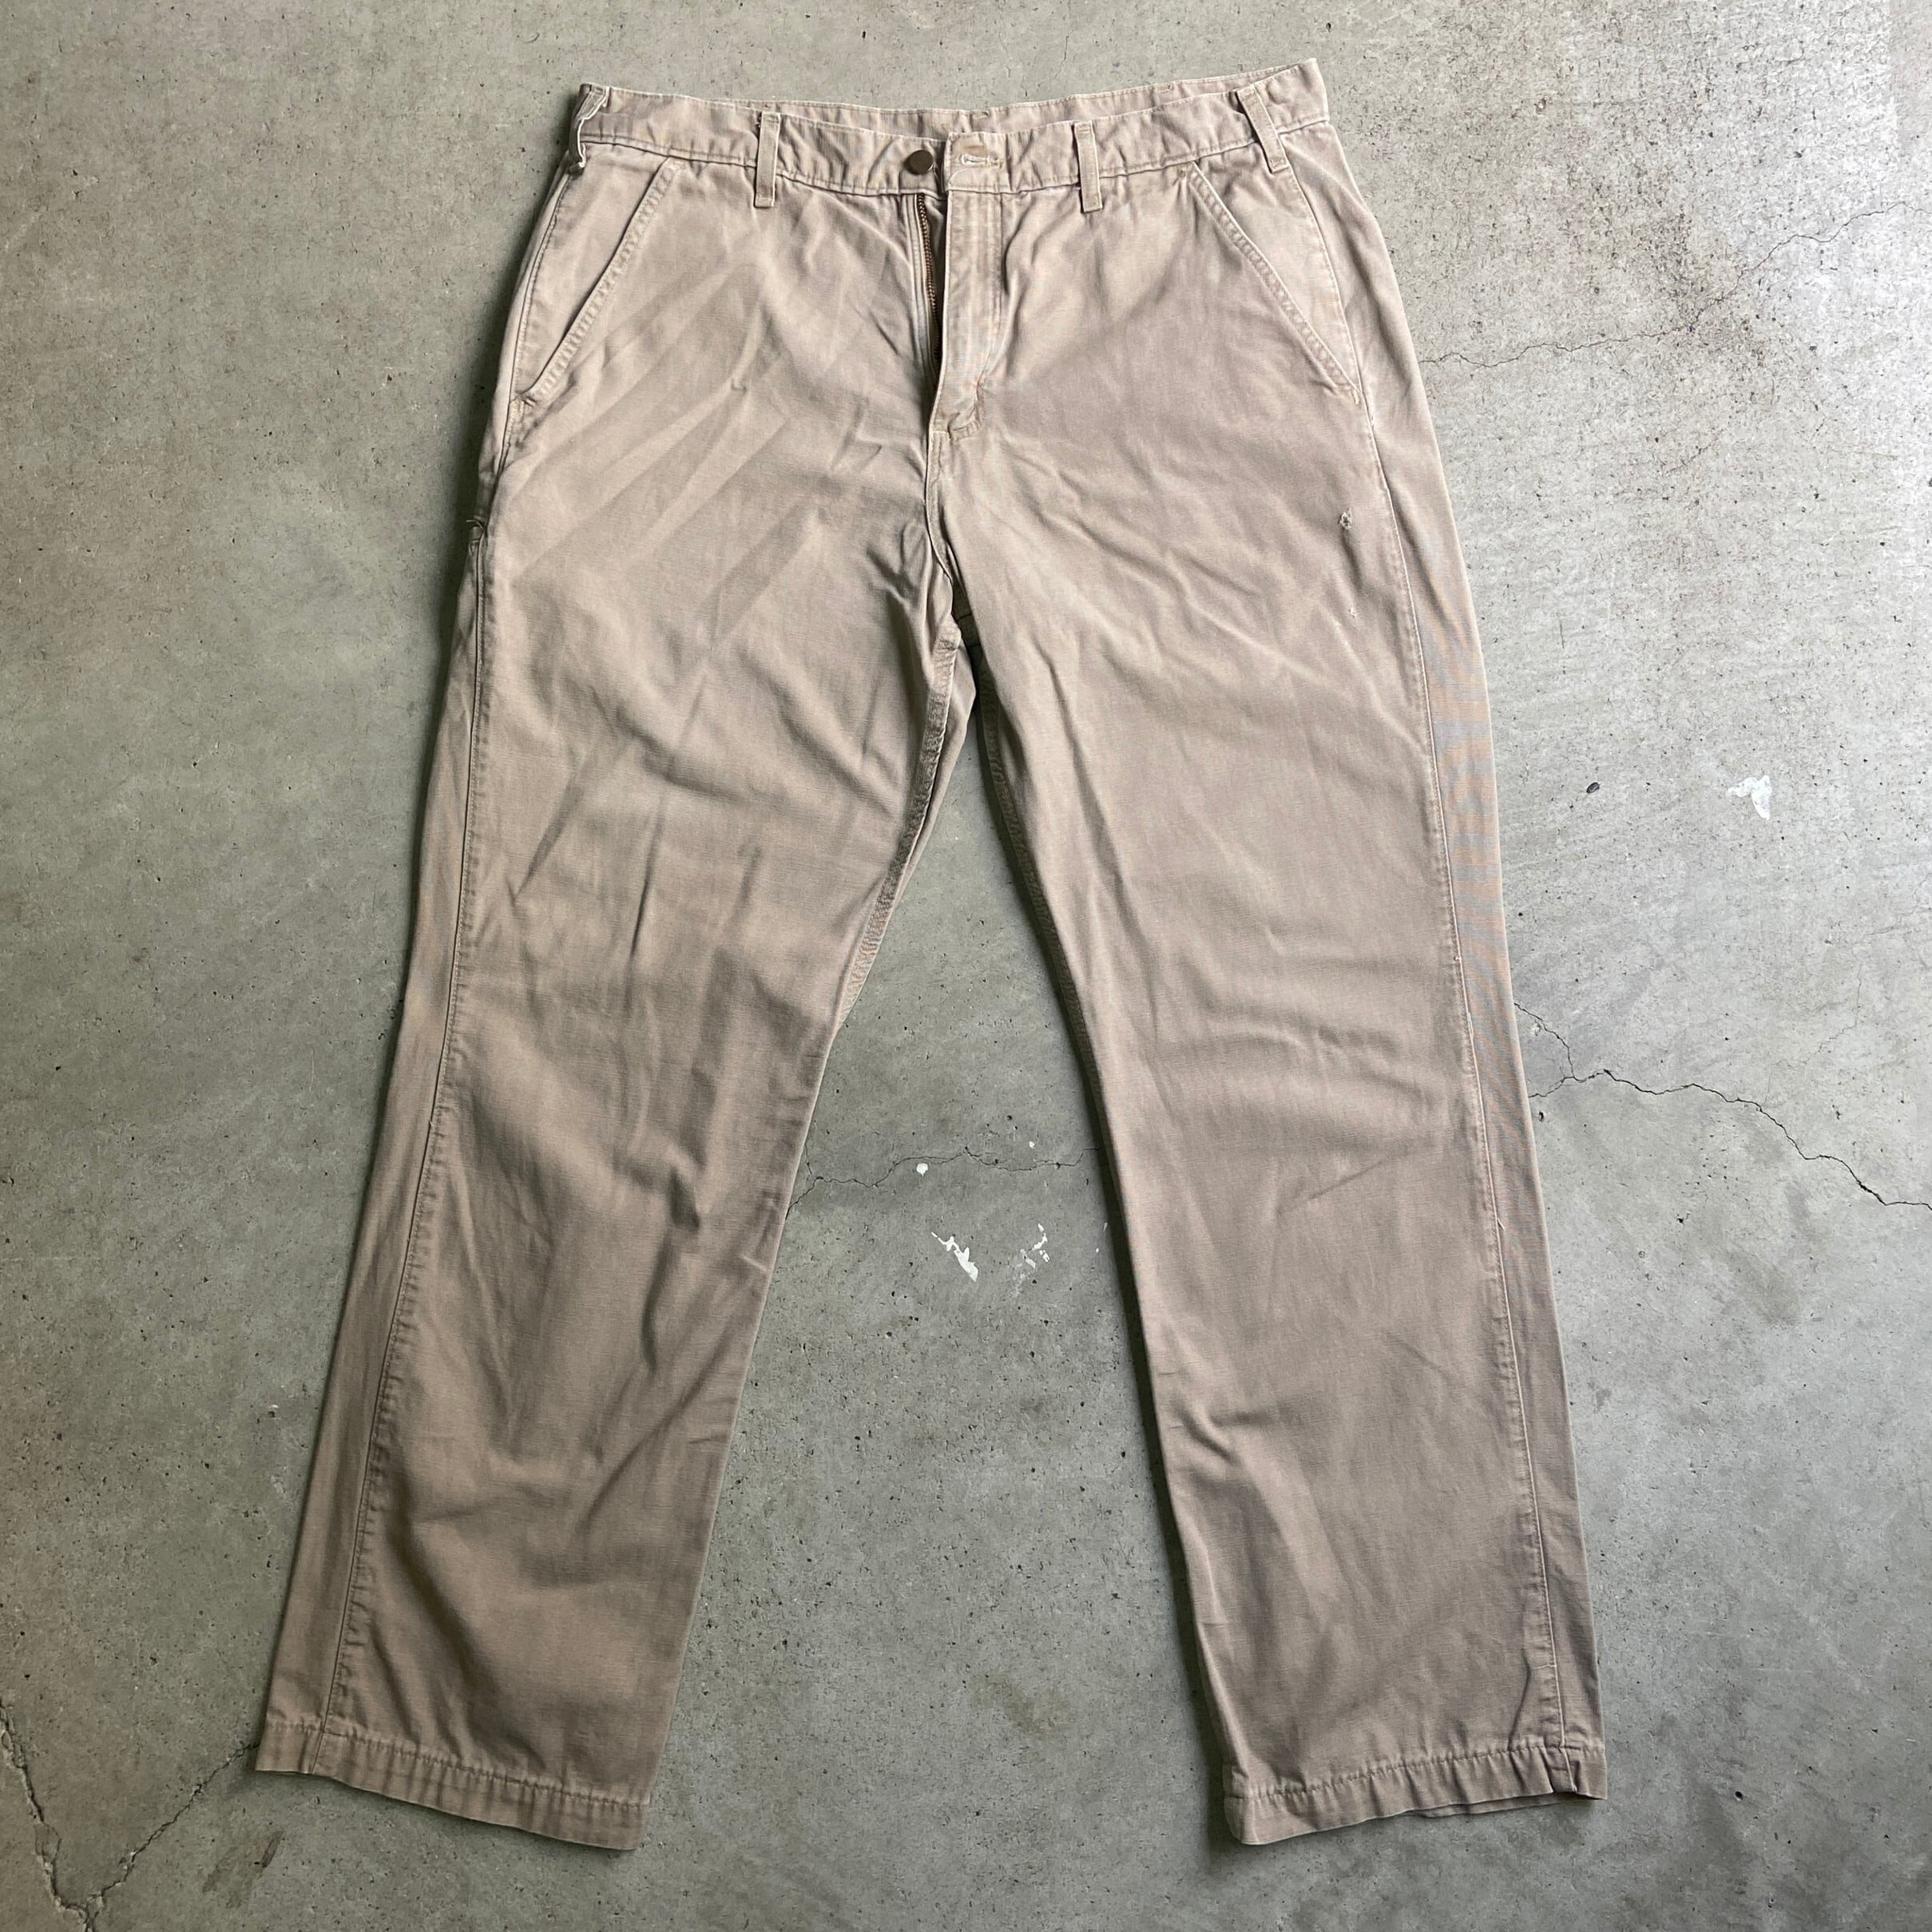 Carhartt カーハート dungaree fit ダック地 ワイド ペインター ワークパンツ メンズW38 古着 ベージュ  ダンガリーフィット【ロングパンツ】【AN20】【PS2307P】 | cave 古着屋【公式】古着通販サイト powered by BASE